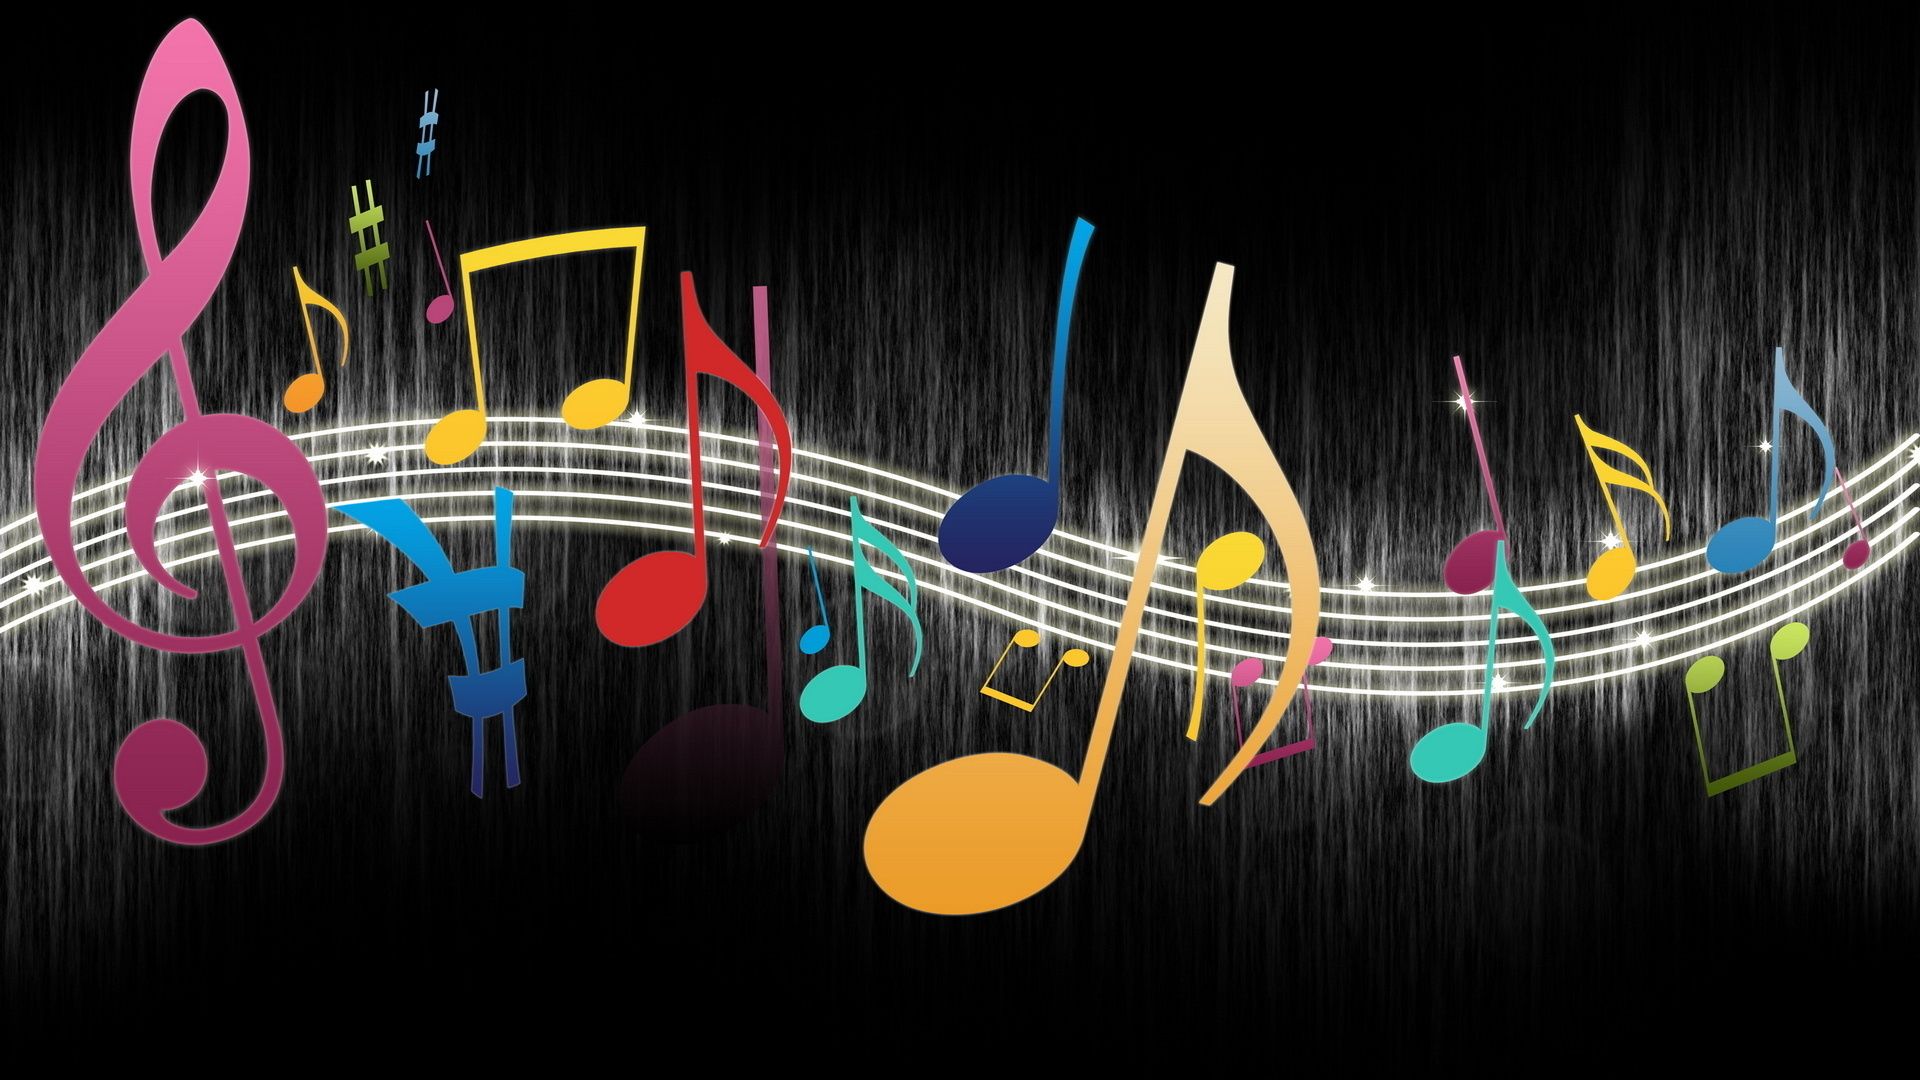 music sound song desktop abstract design disco illustration art note bass pop harmony party guitar clef graphic wallpaper wave